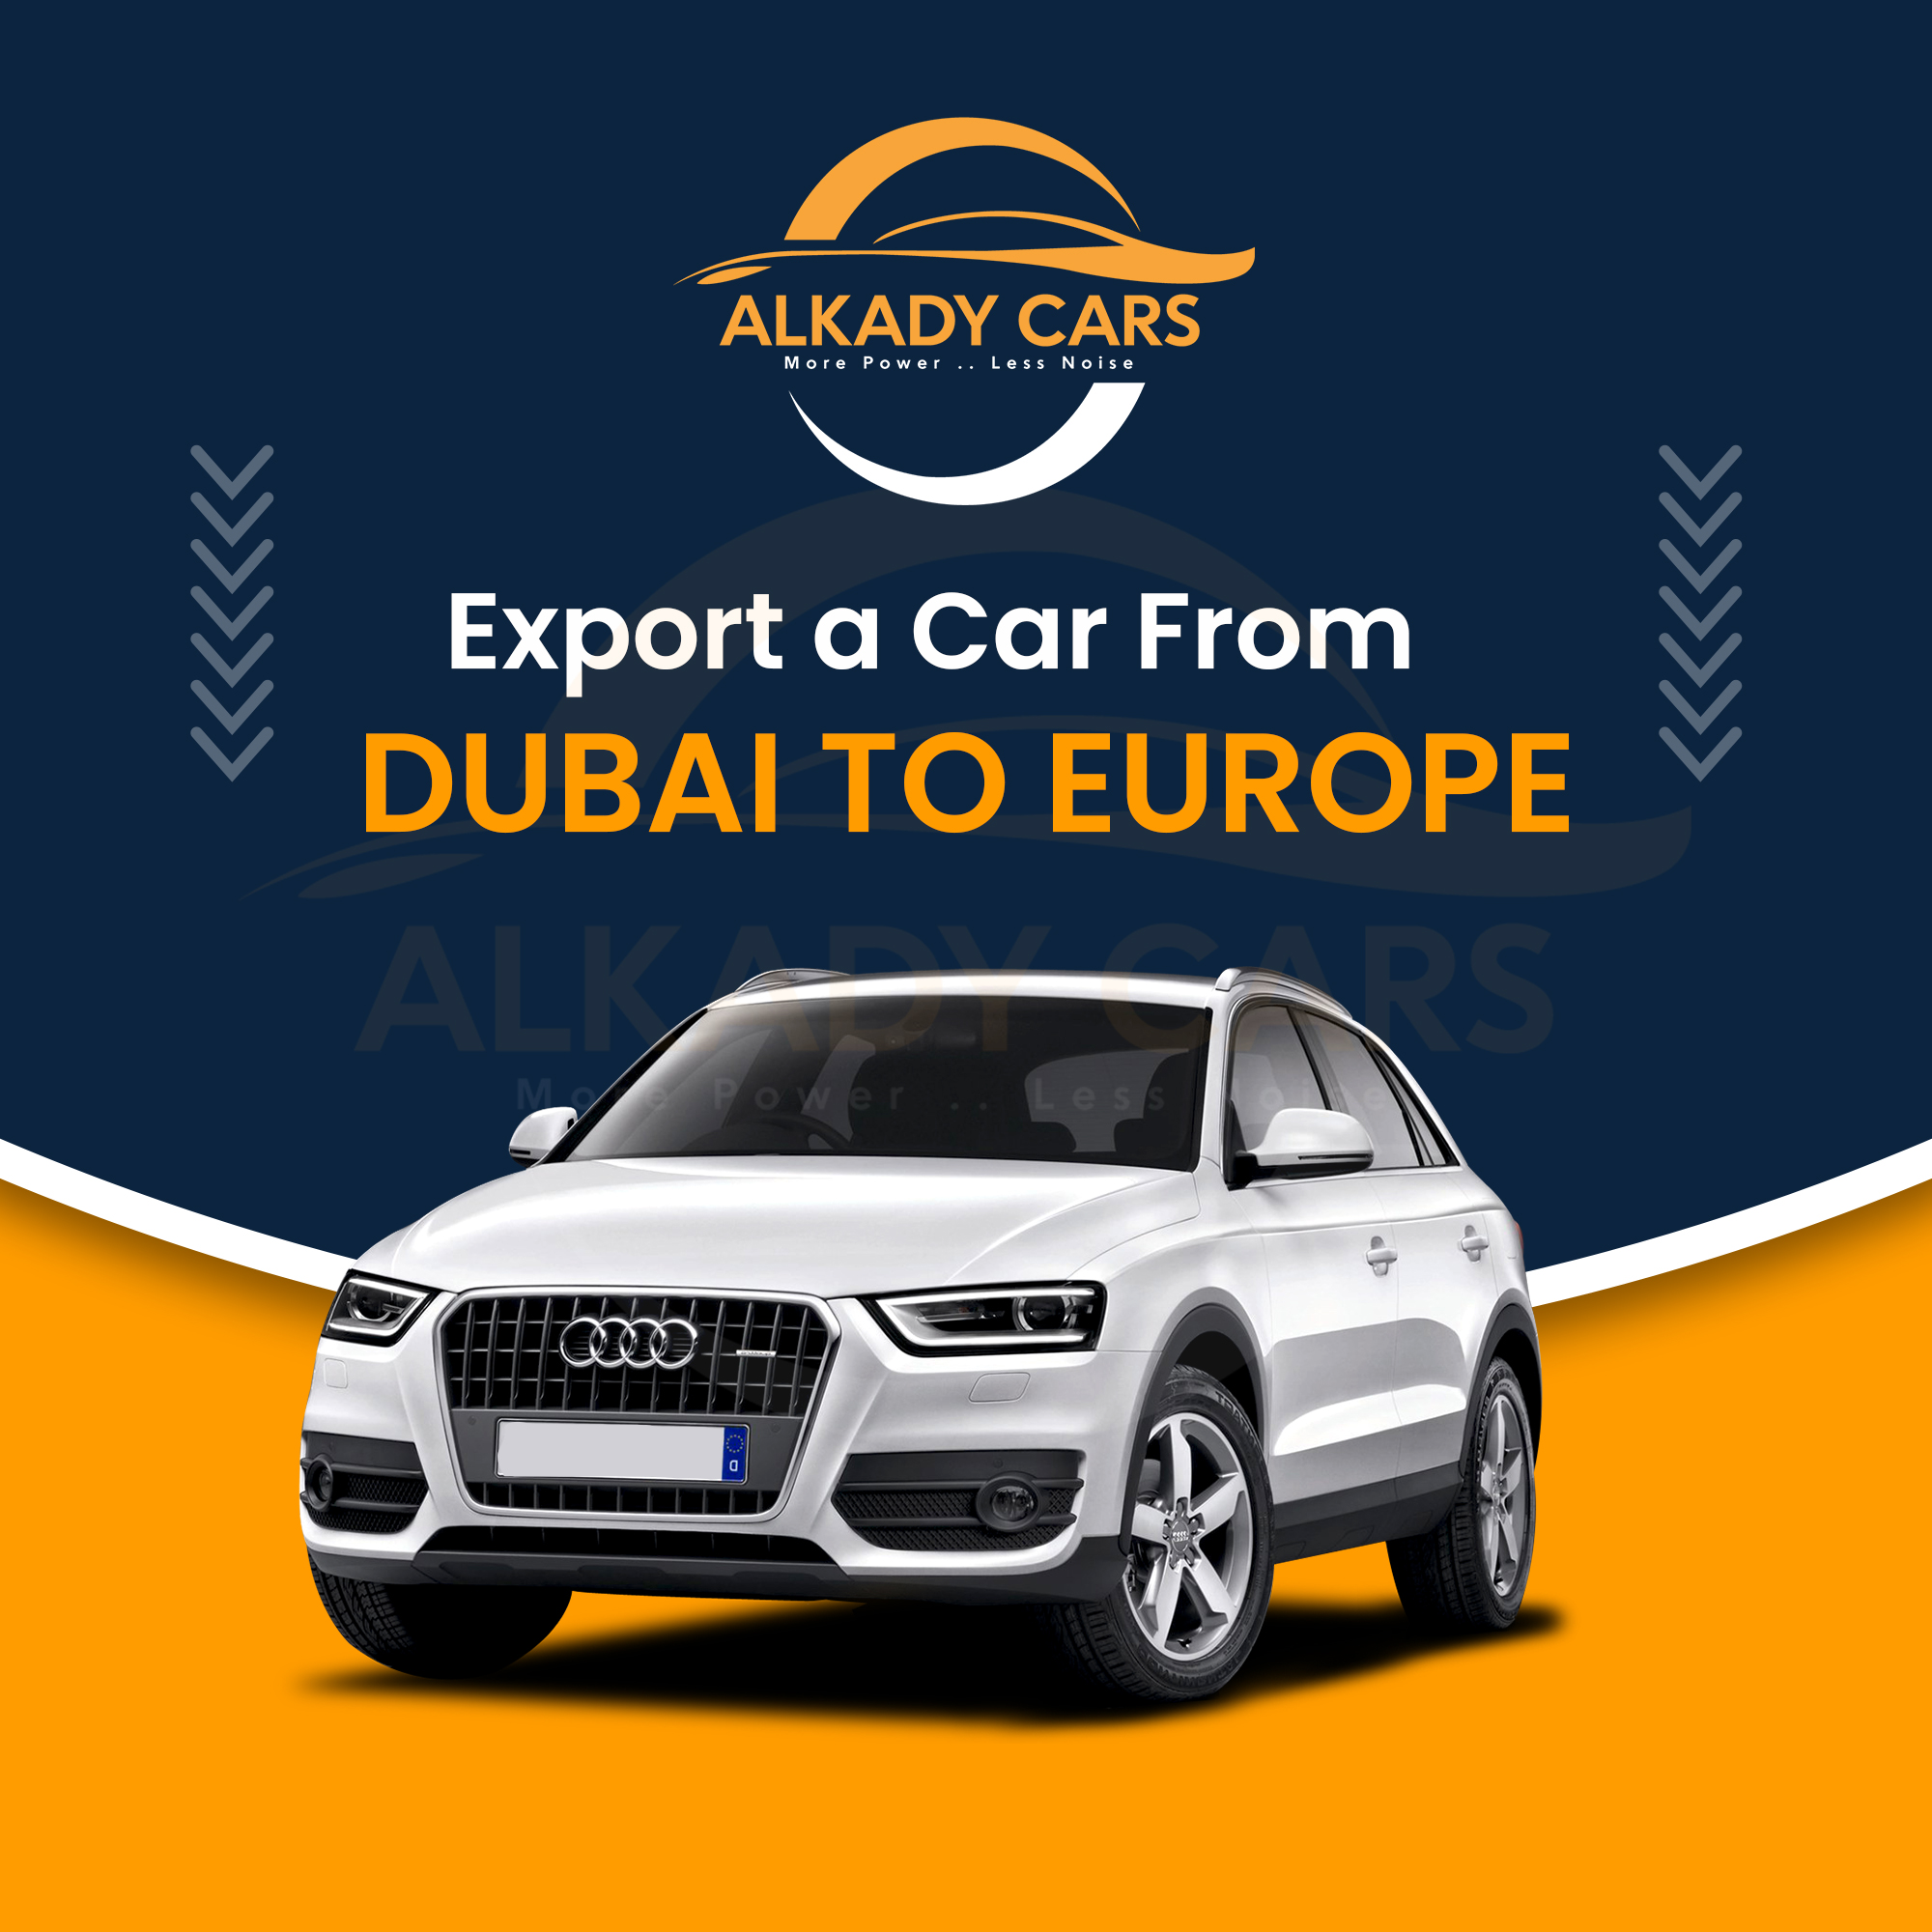 How to Export a Car from Dubai to Europe?